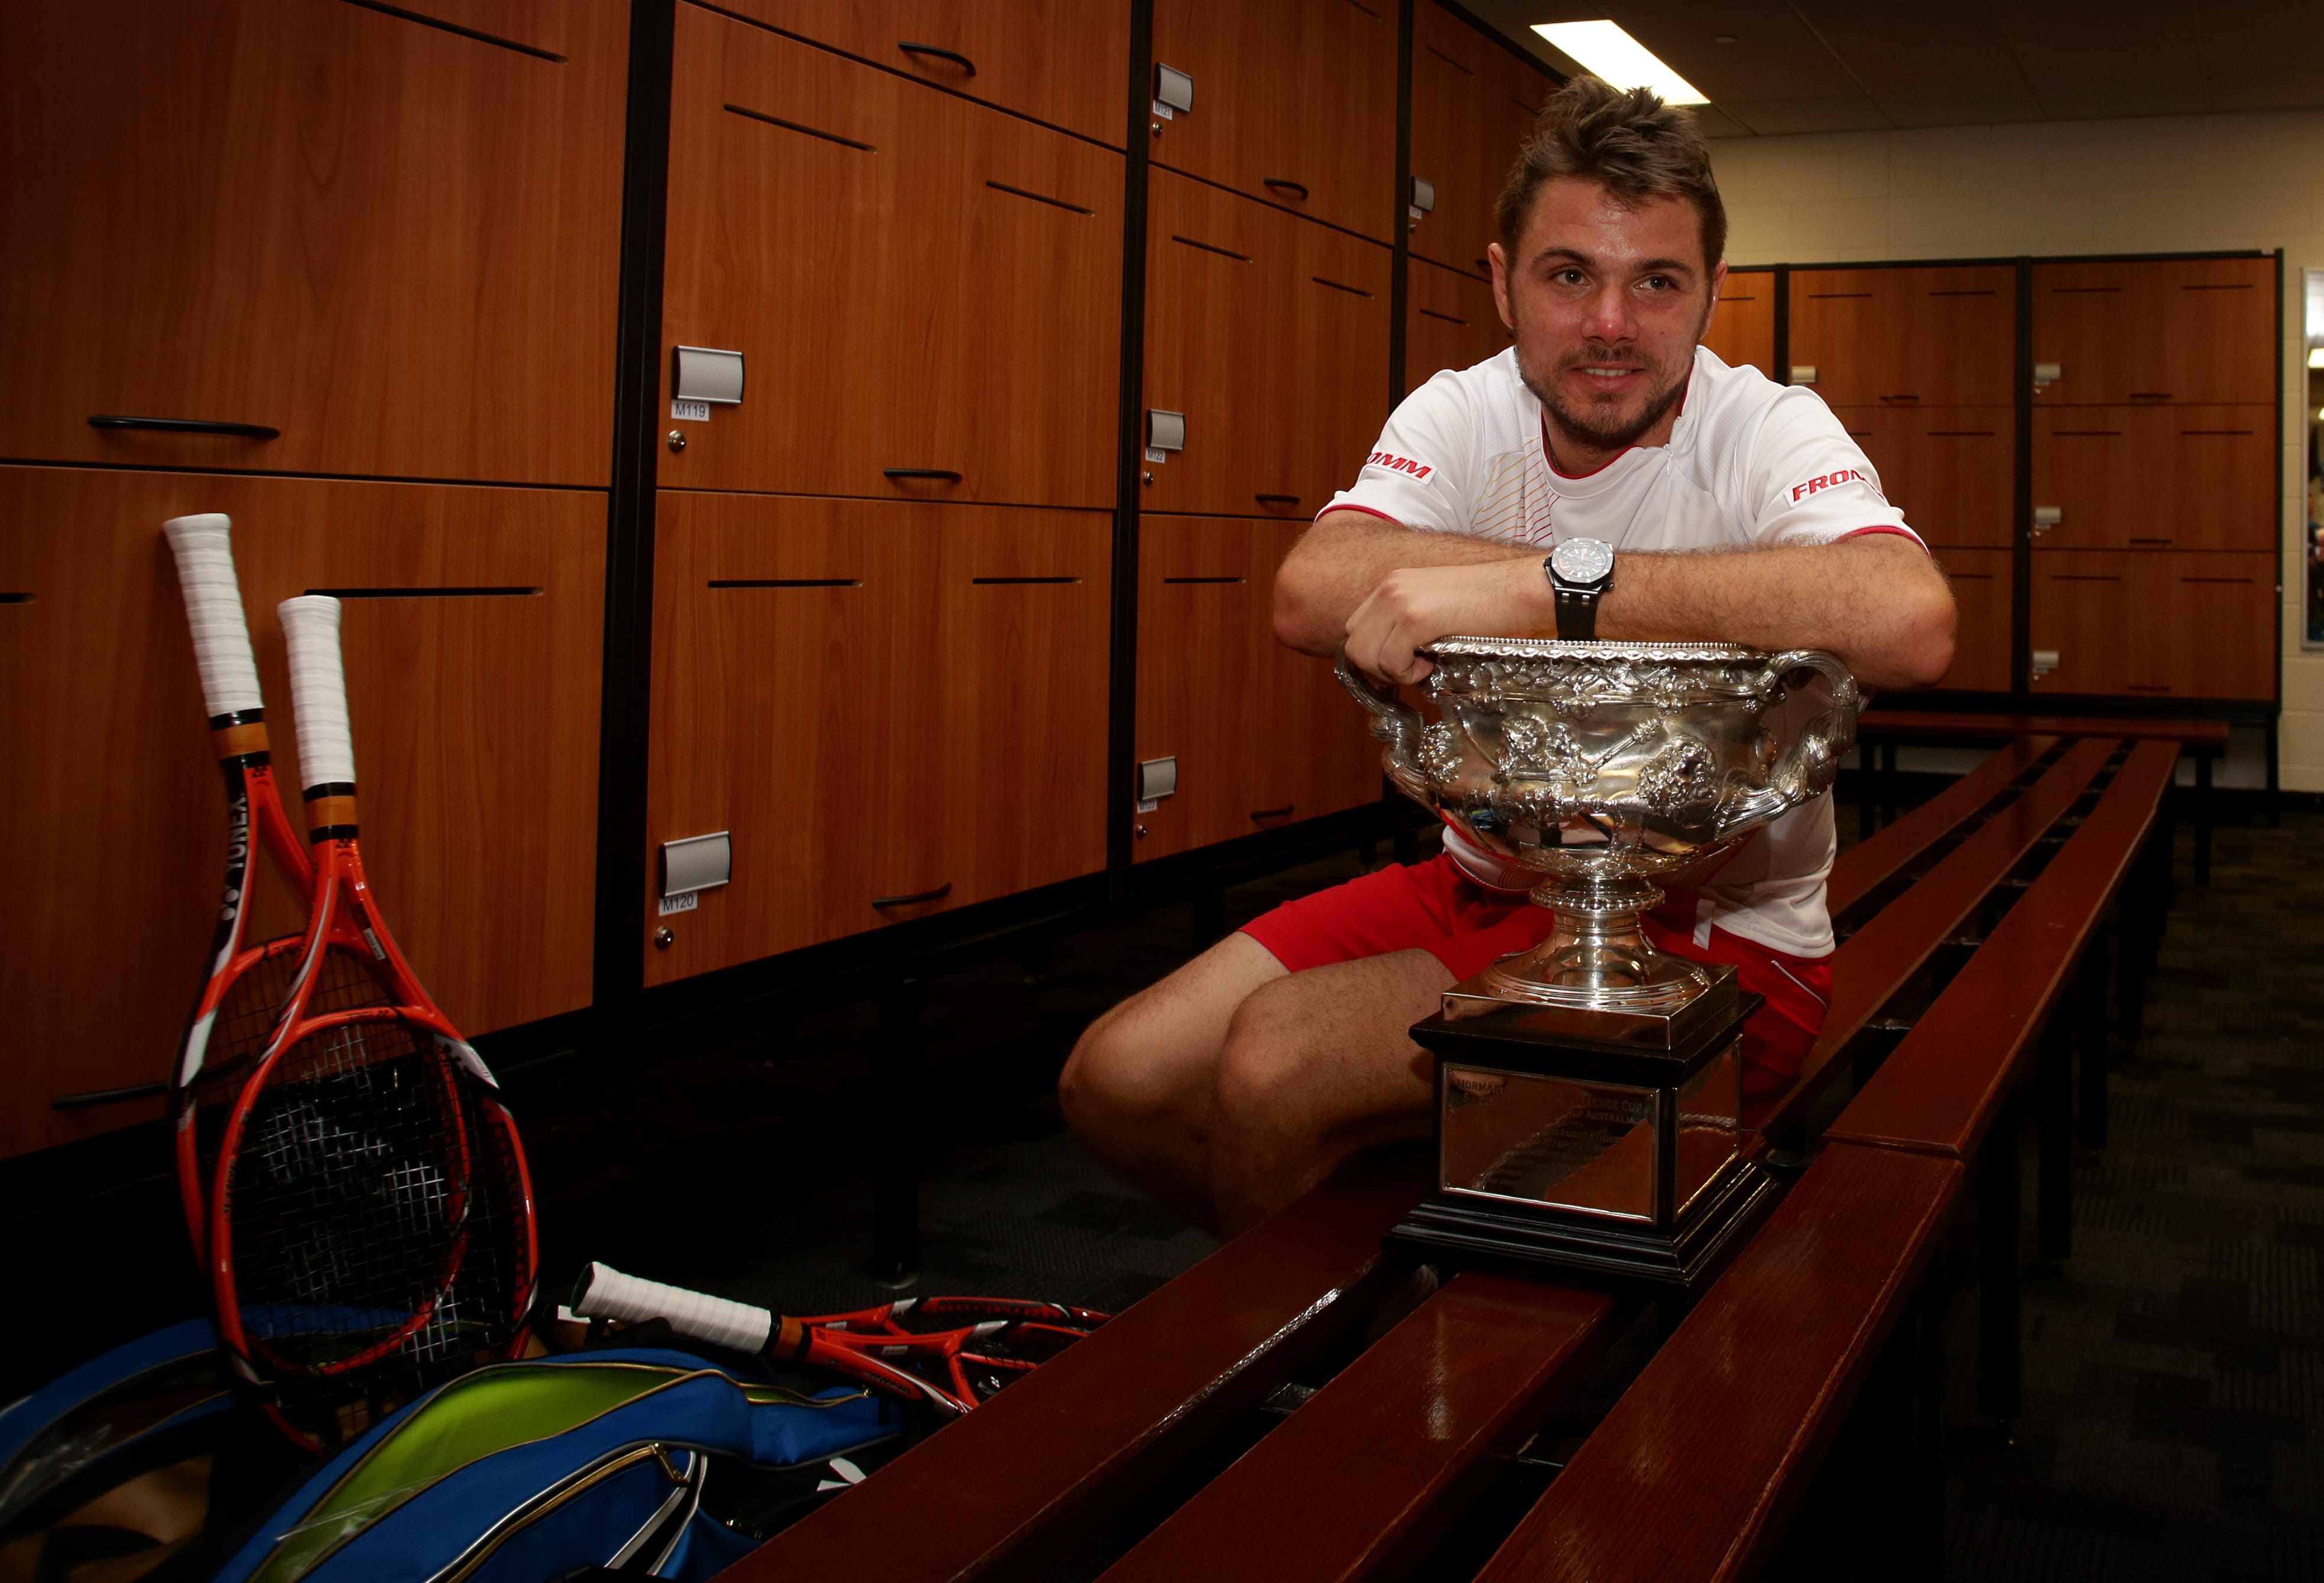 In this photo released by Tennis Australia, Switzerland's Stanislas Wawrinka poses with the championship trophy at the players' locker room after defeating Spain's Rafael Nadal in the men's singles final at the Australian Open tennis championship in Melbourne, Australia, Sunday, Jan. 26, 2014.